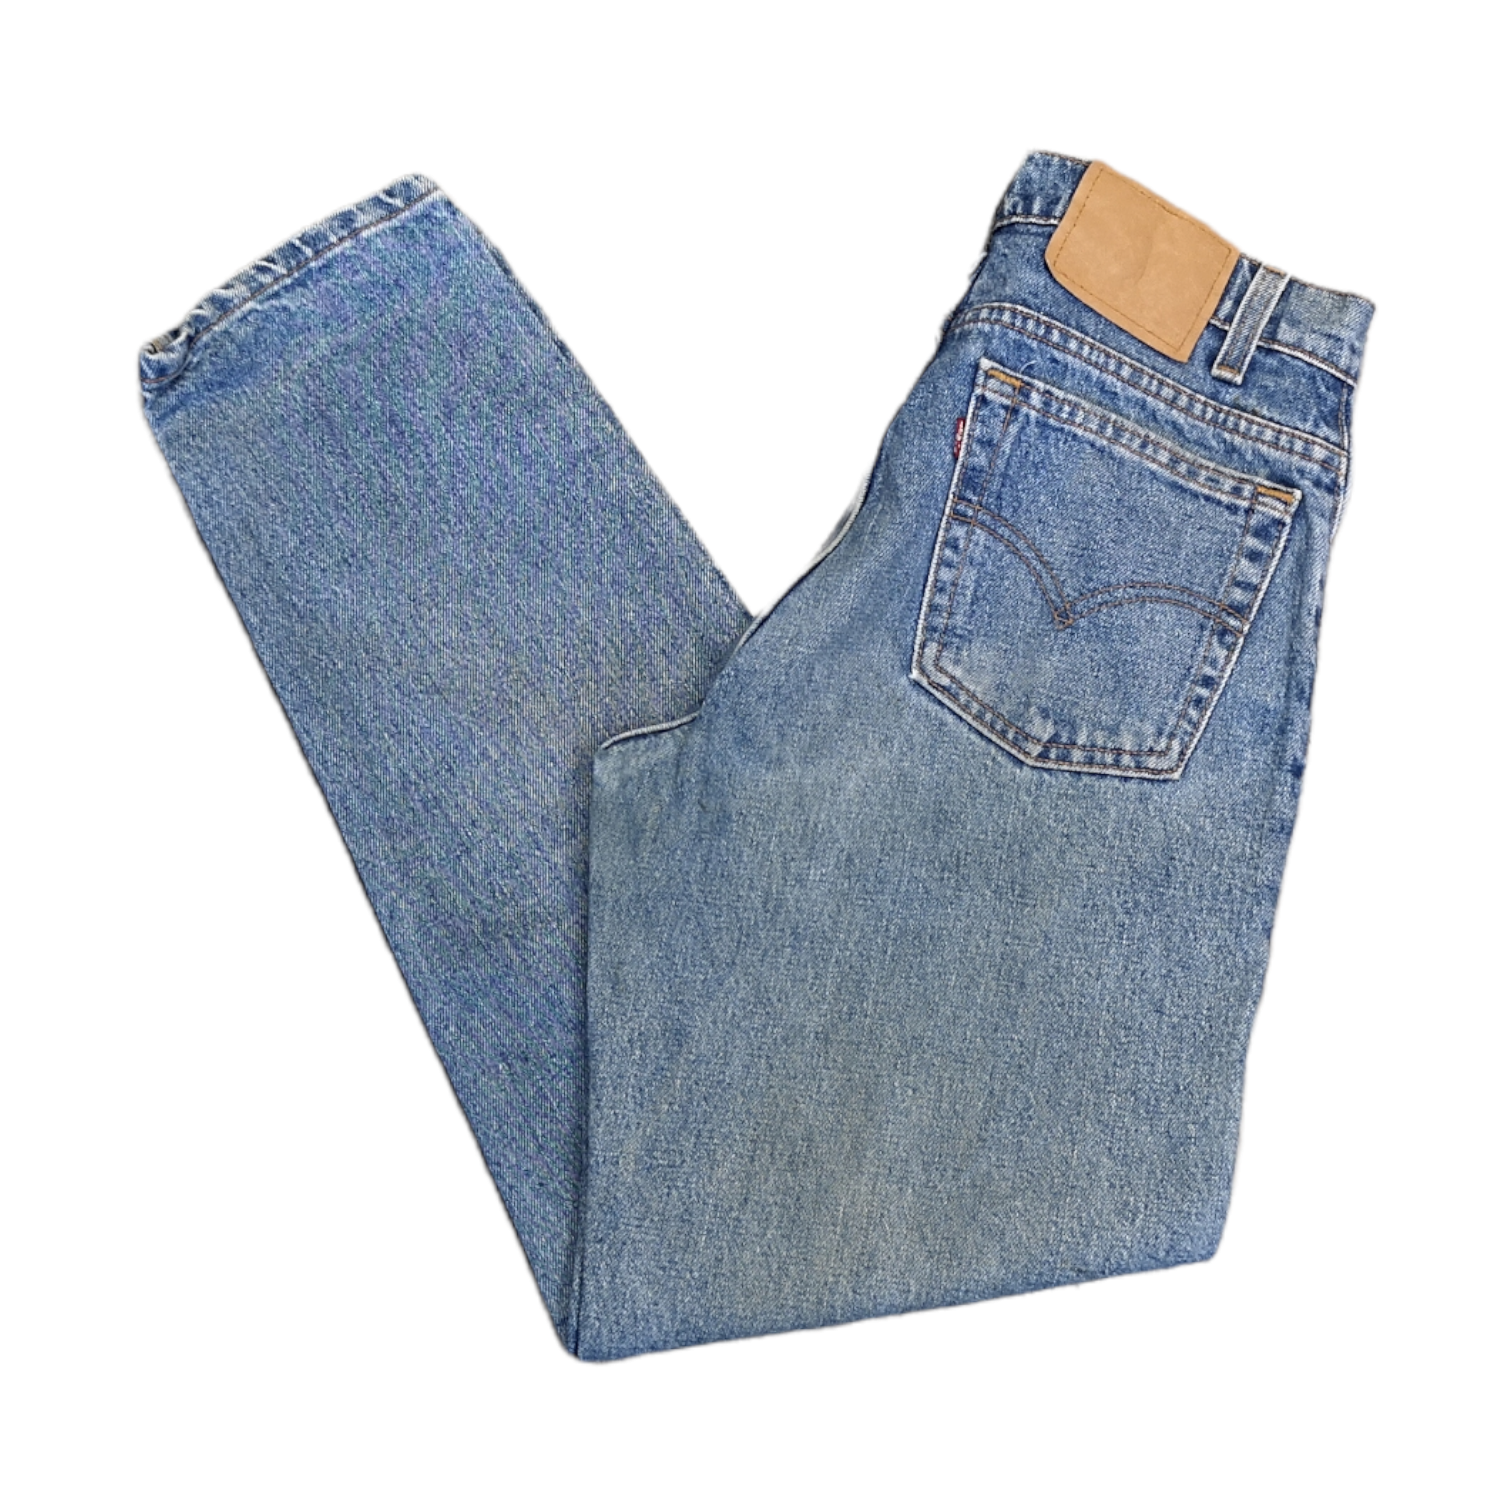 90's Levi's 550's Tapered Leg Jeans - Size W31 L30 – Bad Seed Vintage